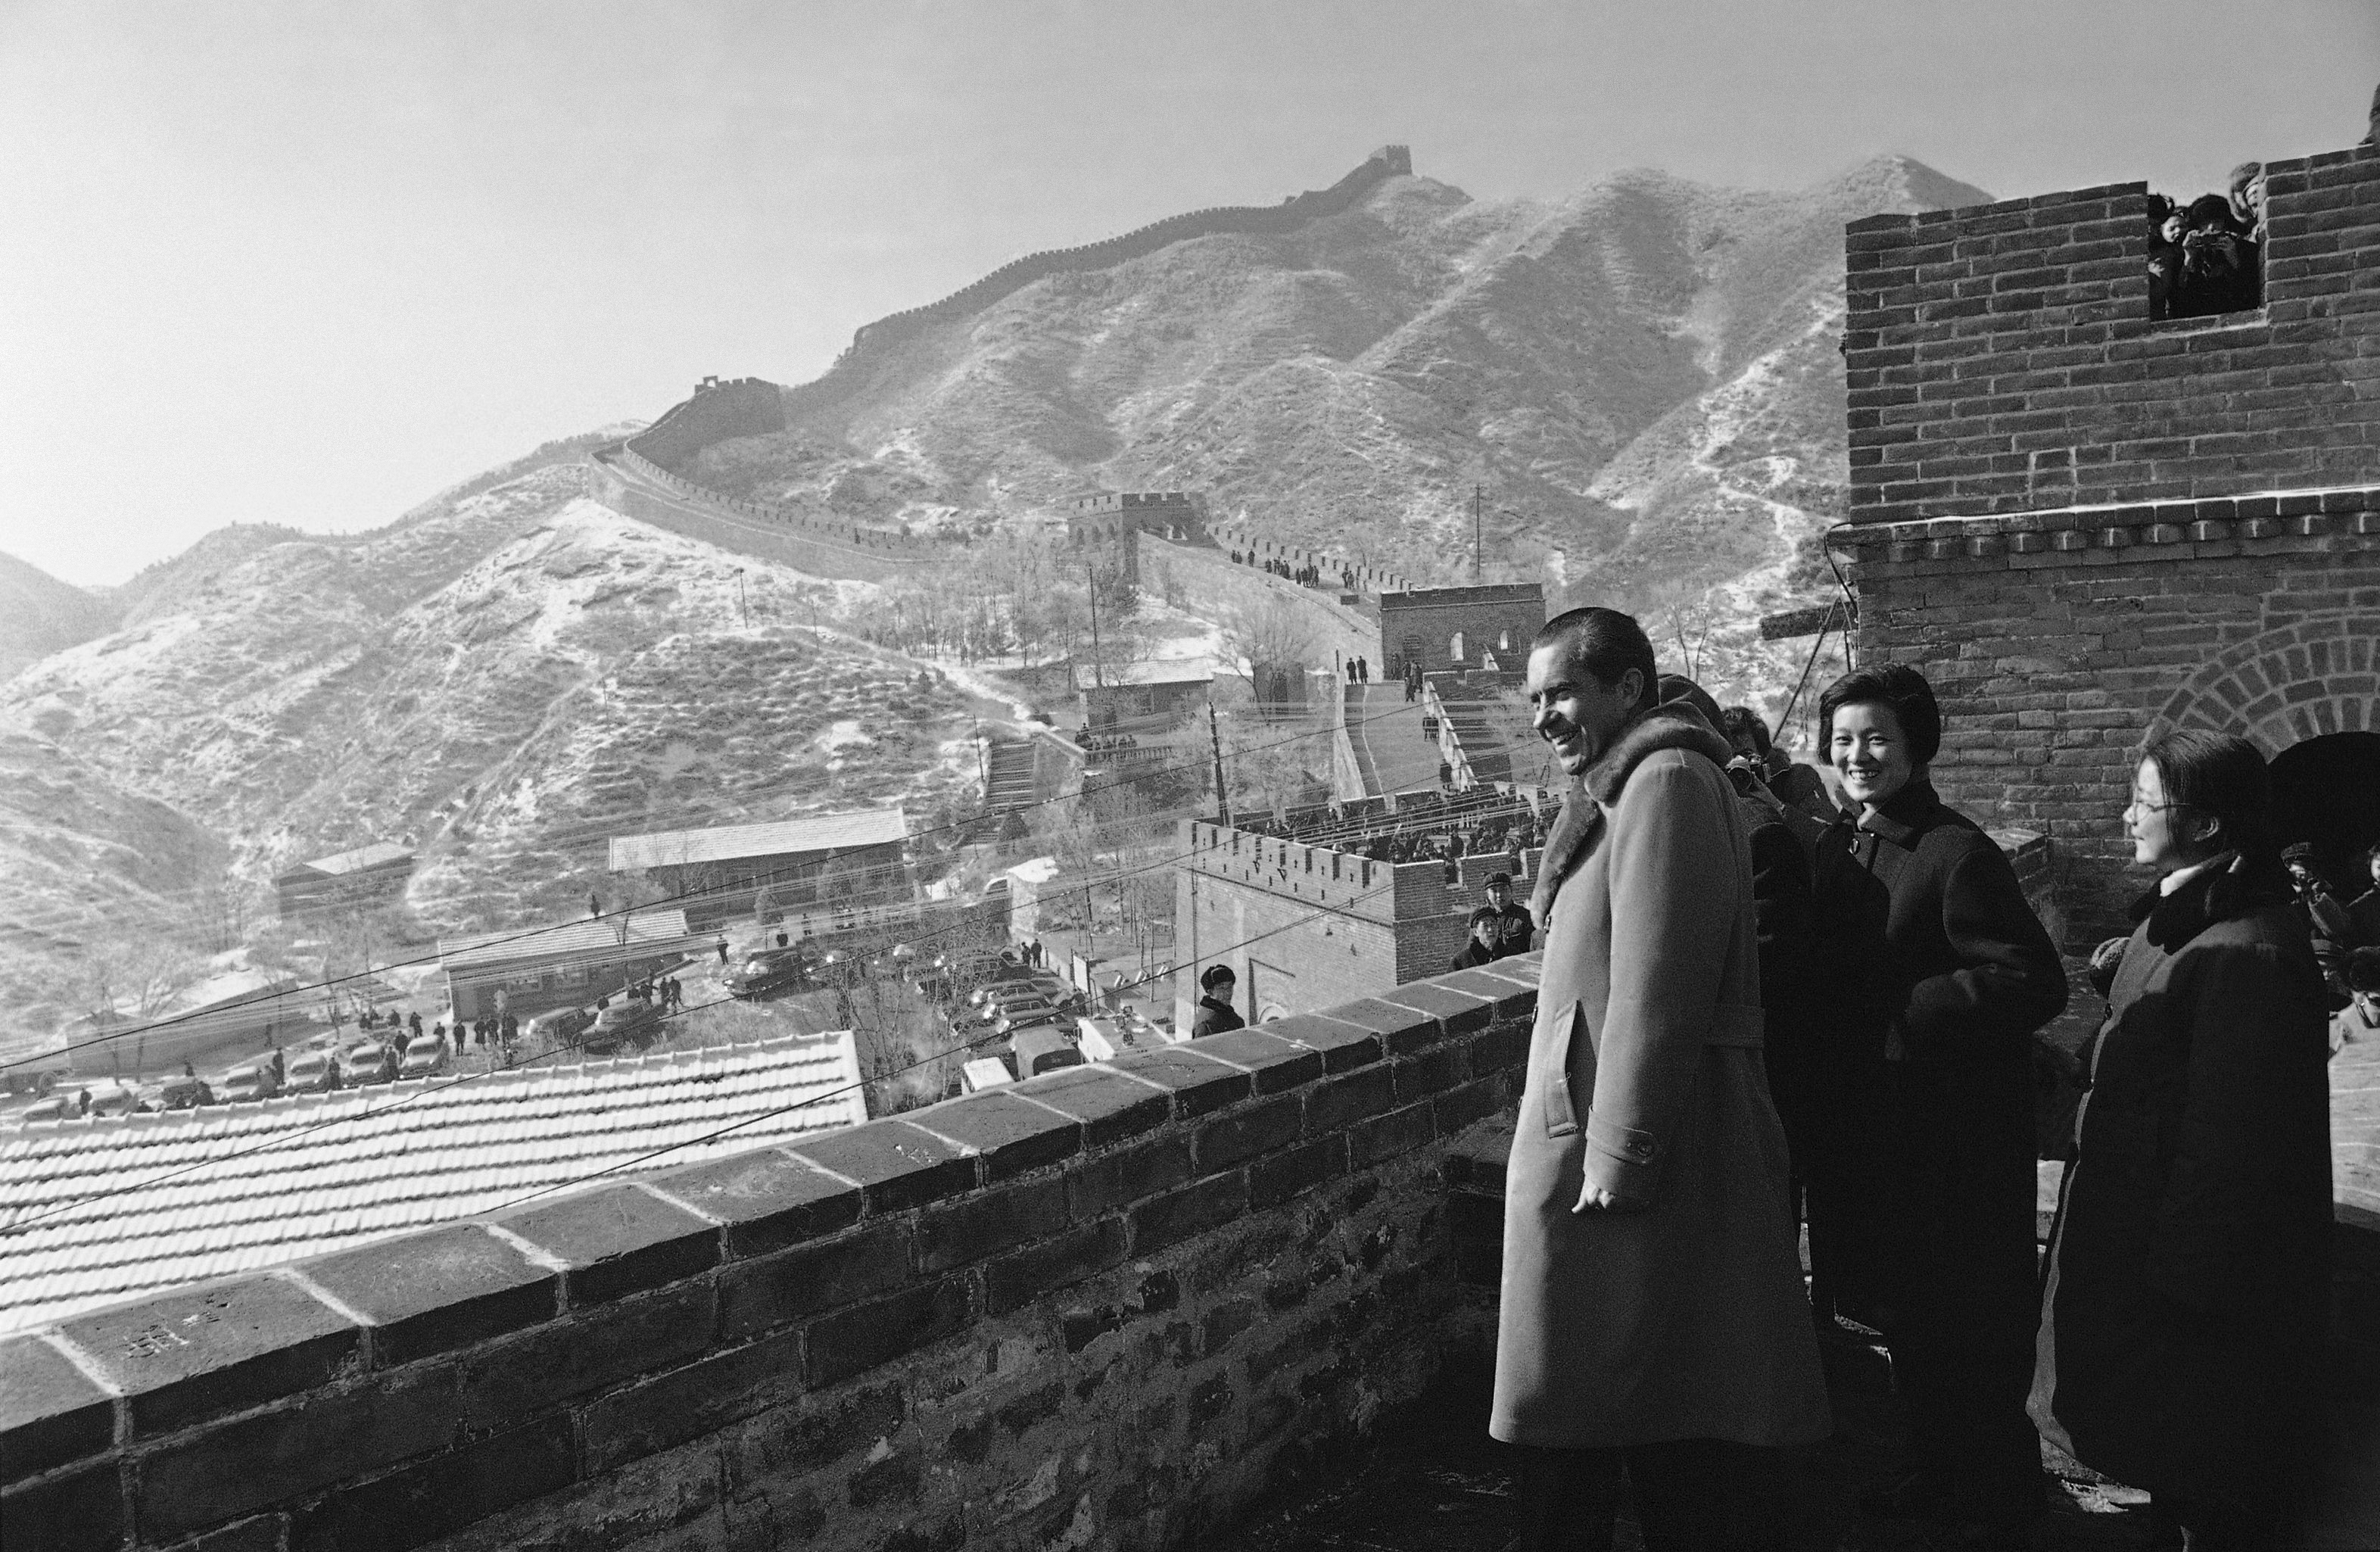 FILE - In this Feb. 24, 1972, file photo, President Richard Nixon, with Chinese guides and interpreters, stands on the Great Wall of China outside Peking. Richard Nixon made the historic journey to meet Chinese leader Mao Zedong in part paved by a U.S. pingpong delegation that traveled to Beijing a year earlier. (AP Photo/File)